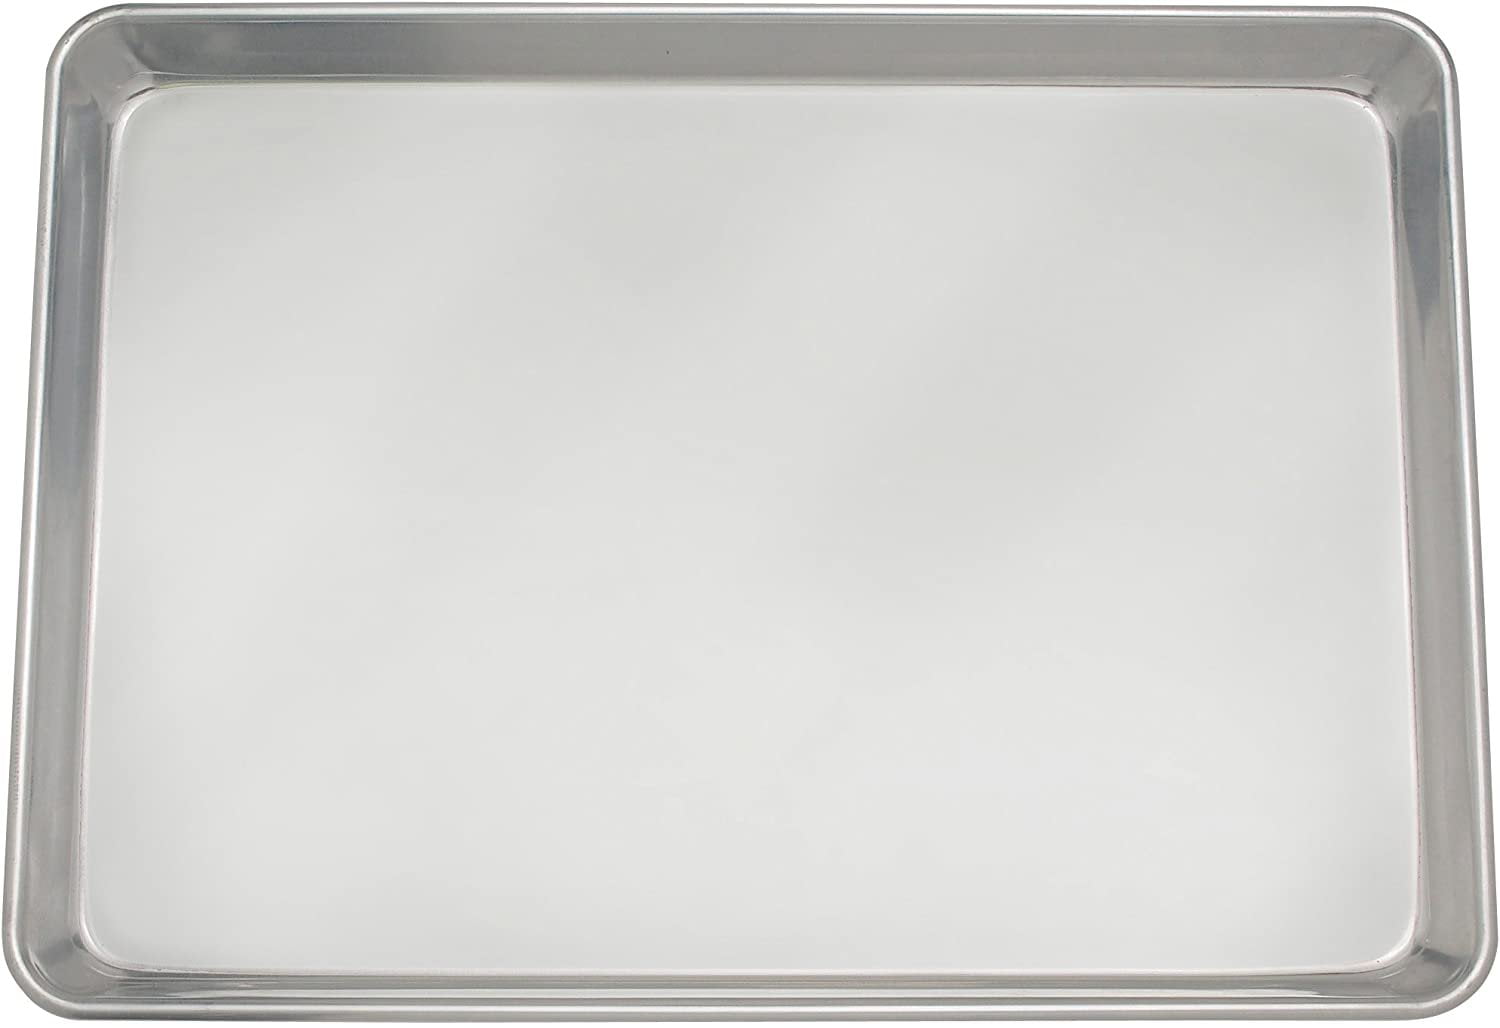  Mrs. Anderson's Baking Jelly Roll Pan, 10.25-Inches x  15.25-Inches, Heavyweight Commercial Grade 19-Gauge Aluminum: Home & Kitchen